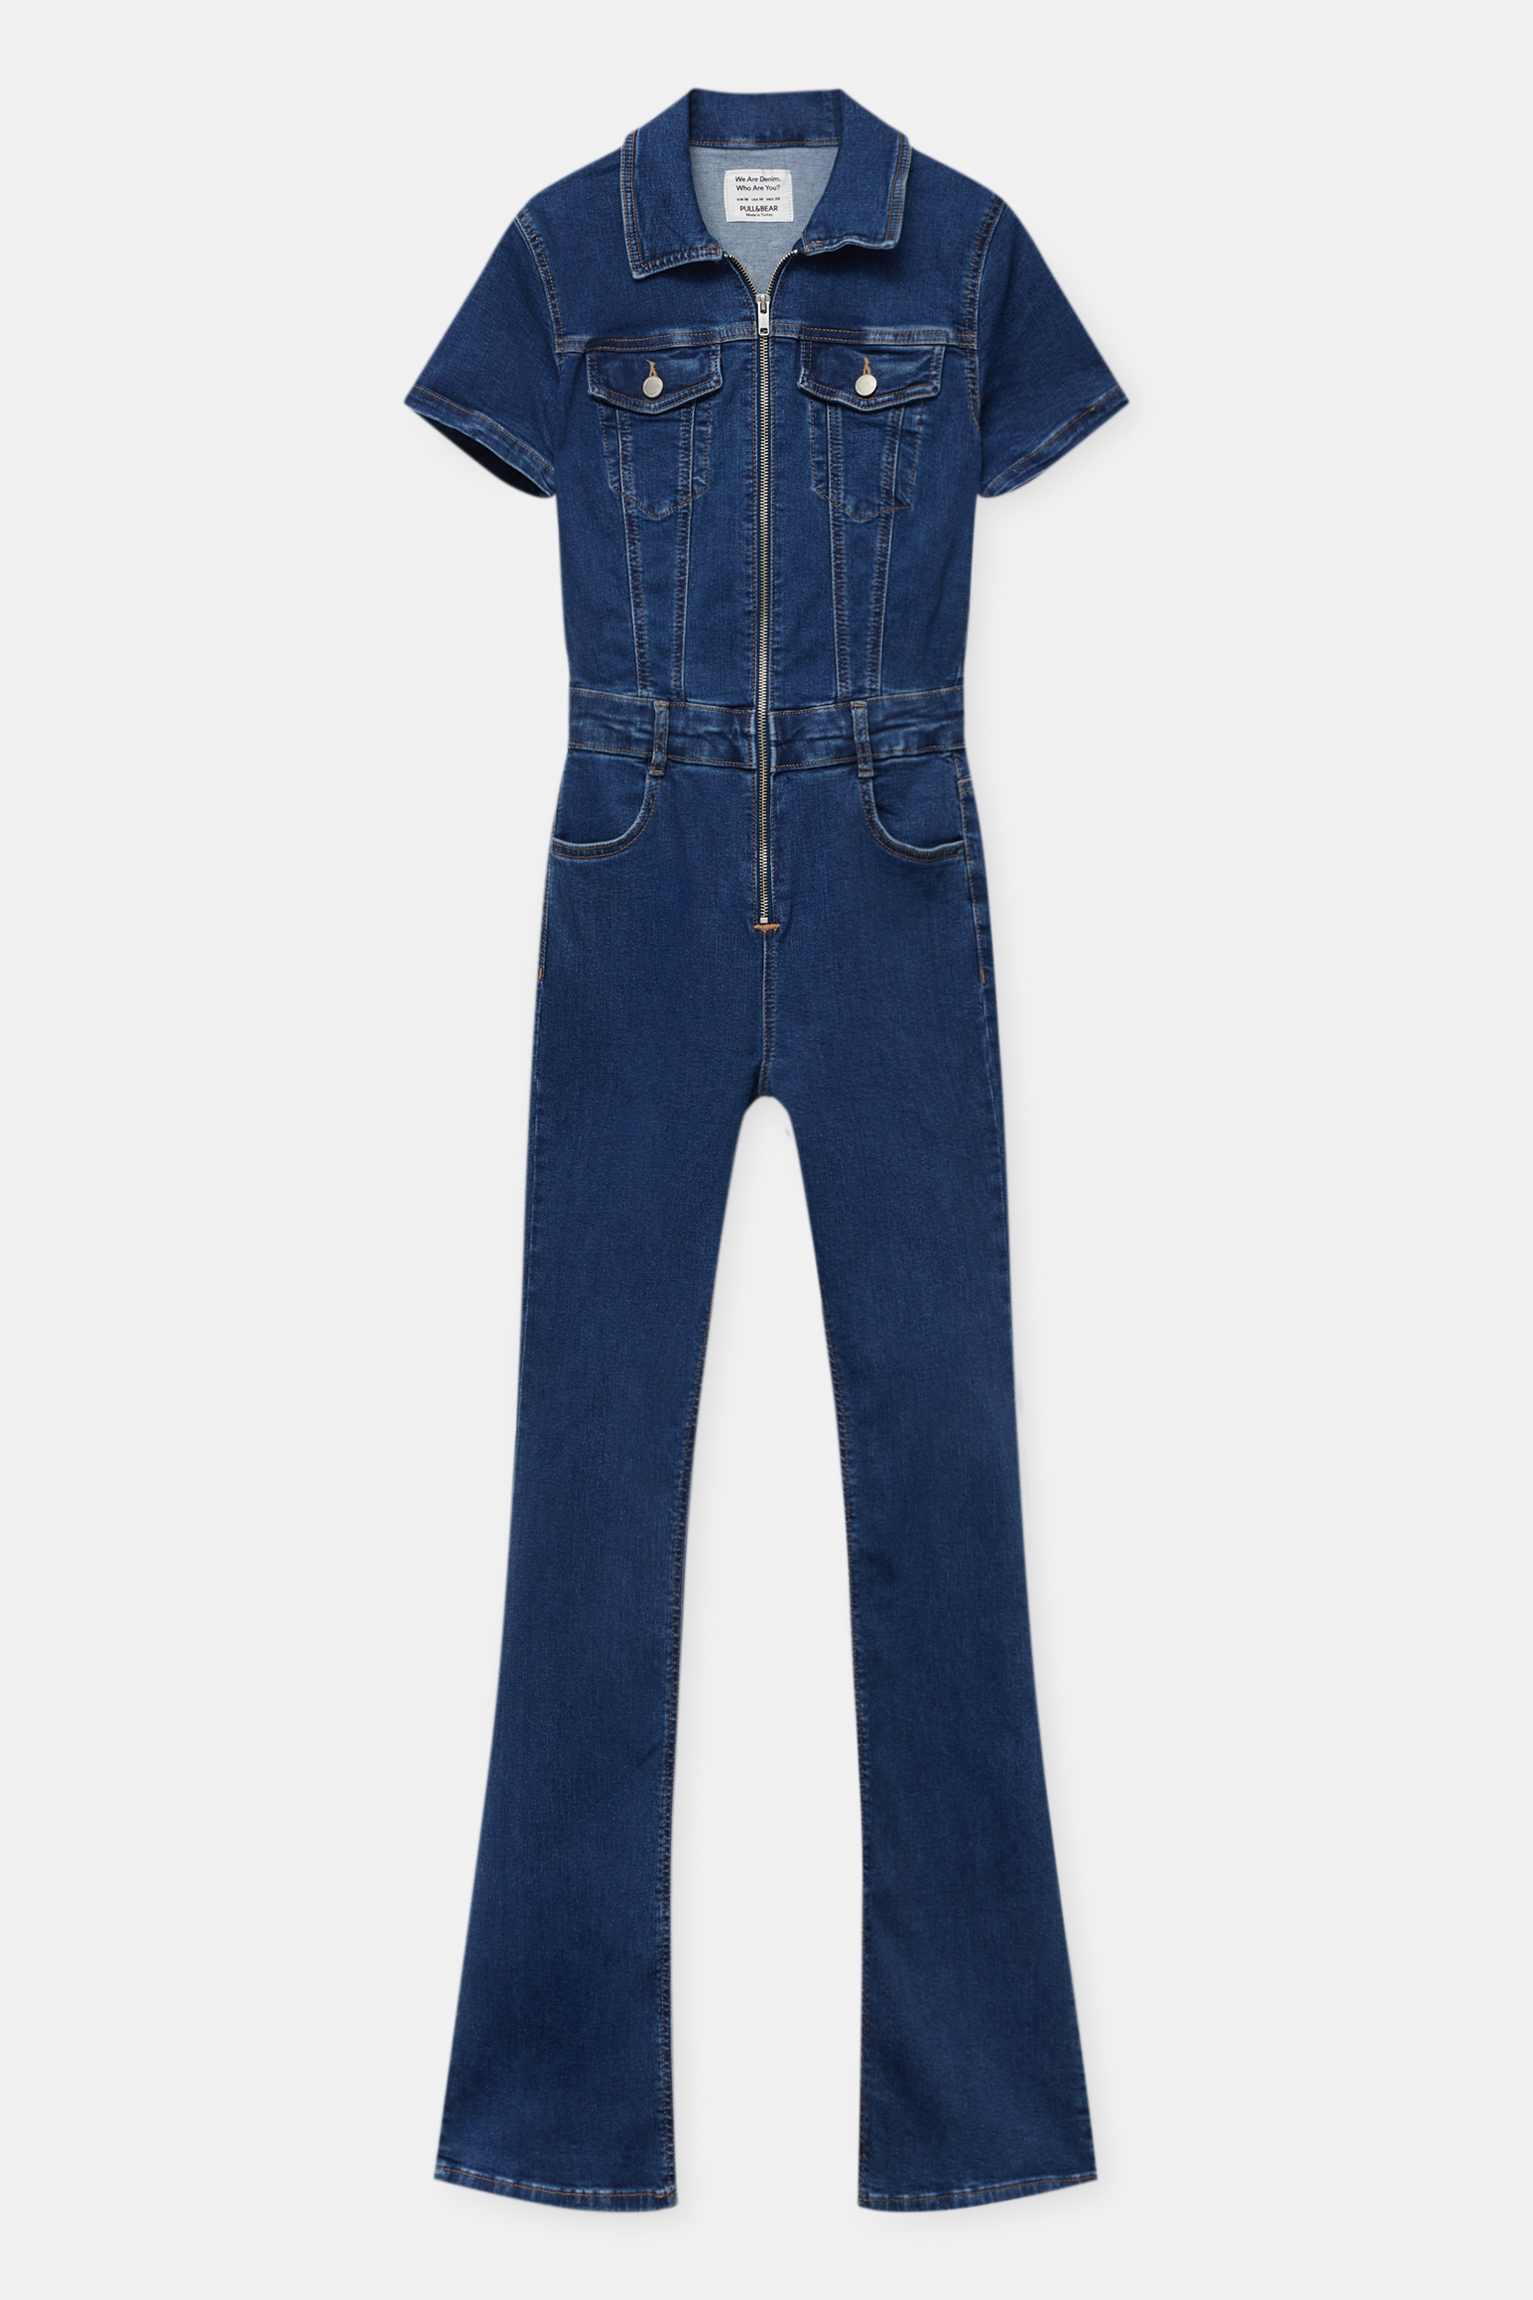 SHEIN SXY Button Front Slant Pocket Denim Overall Jumpsuit | SHEIN Malaysia